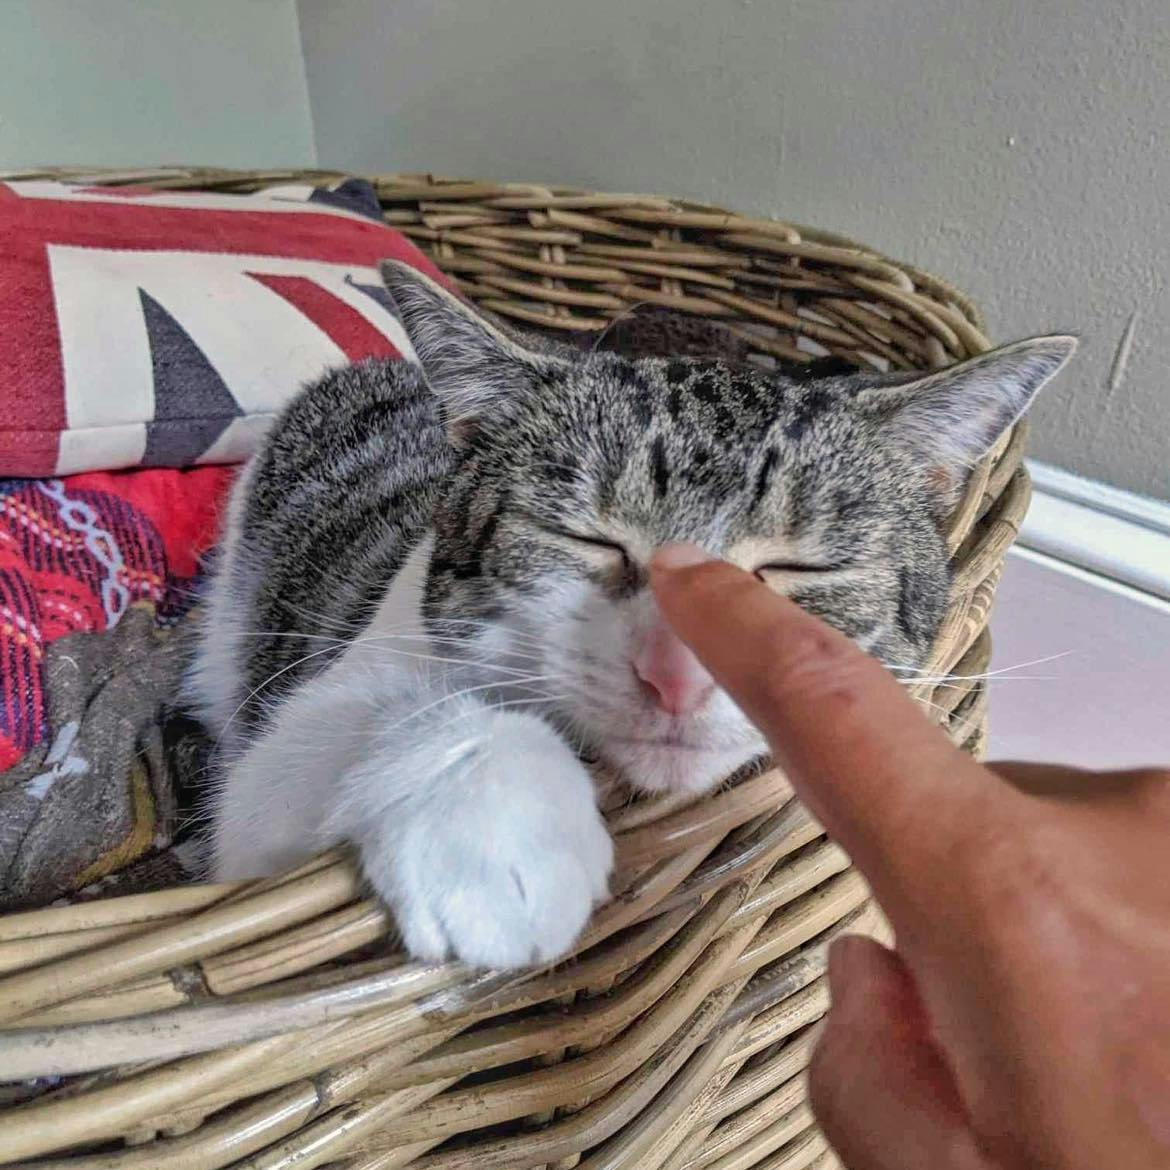 A cat getting booped in the nose